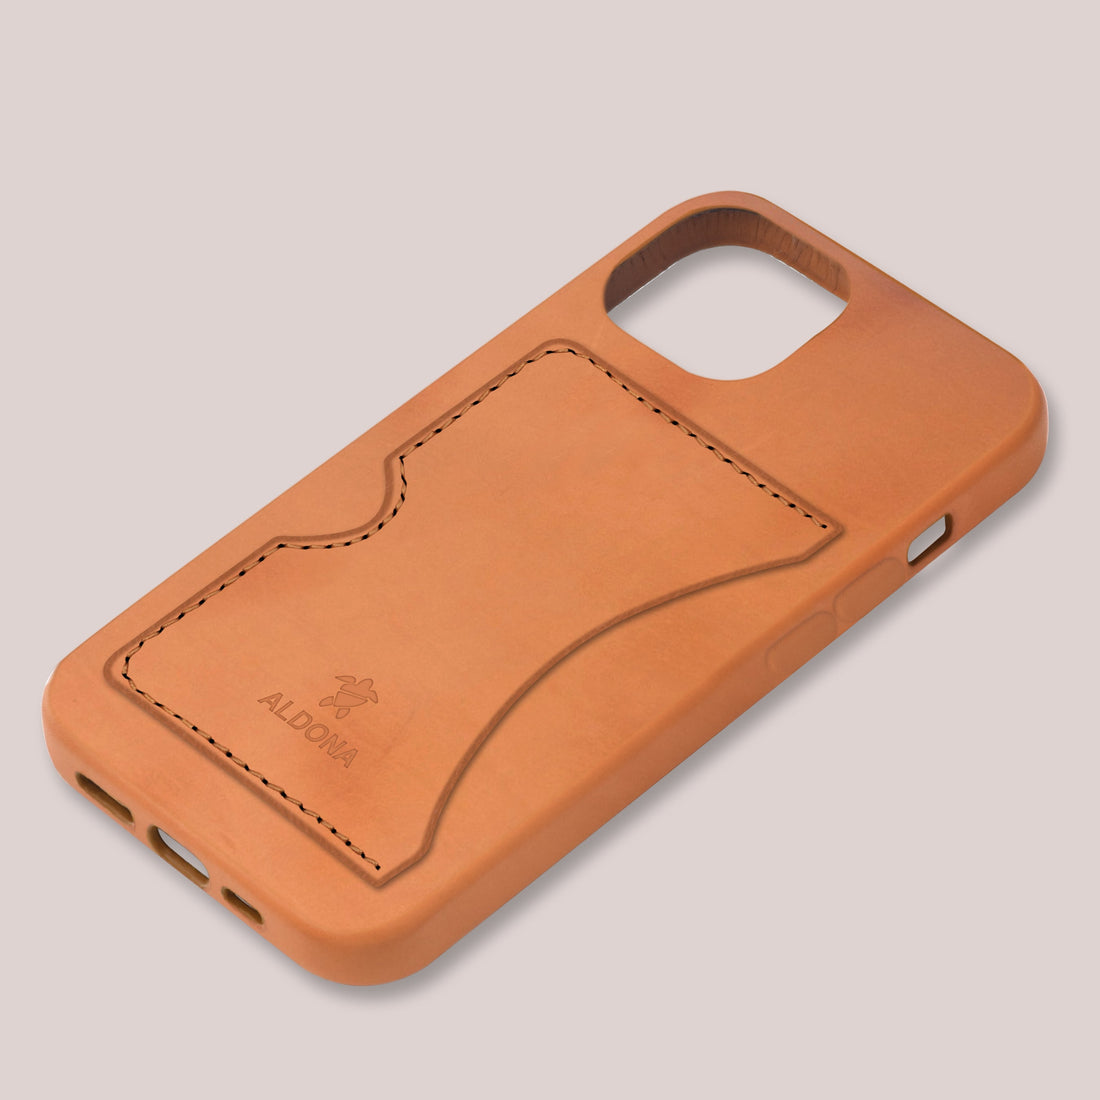 Baxter Card Case for iPhone 12 Mini - Burnt Tobacco